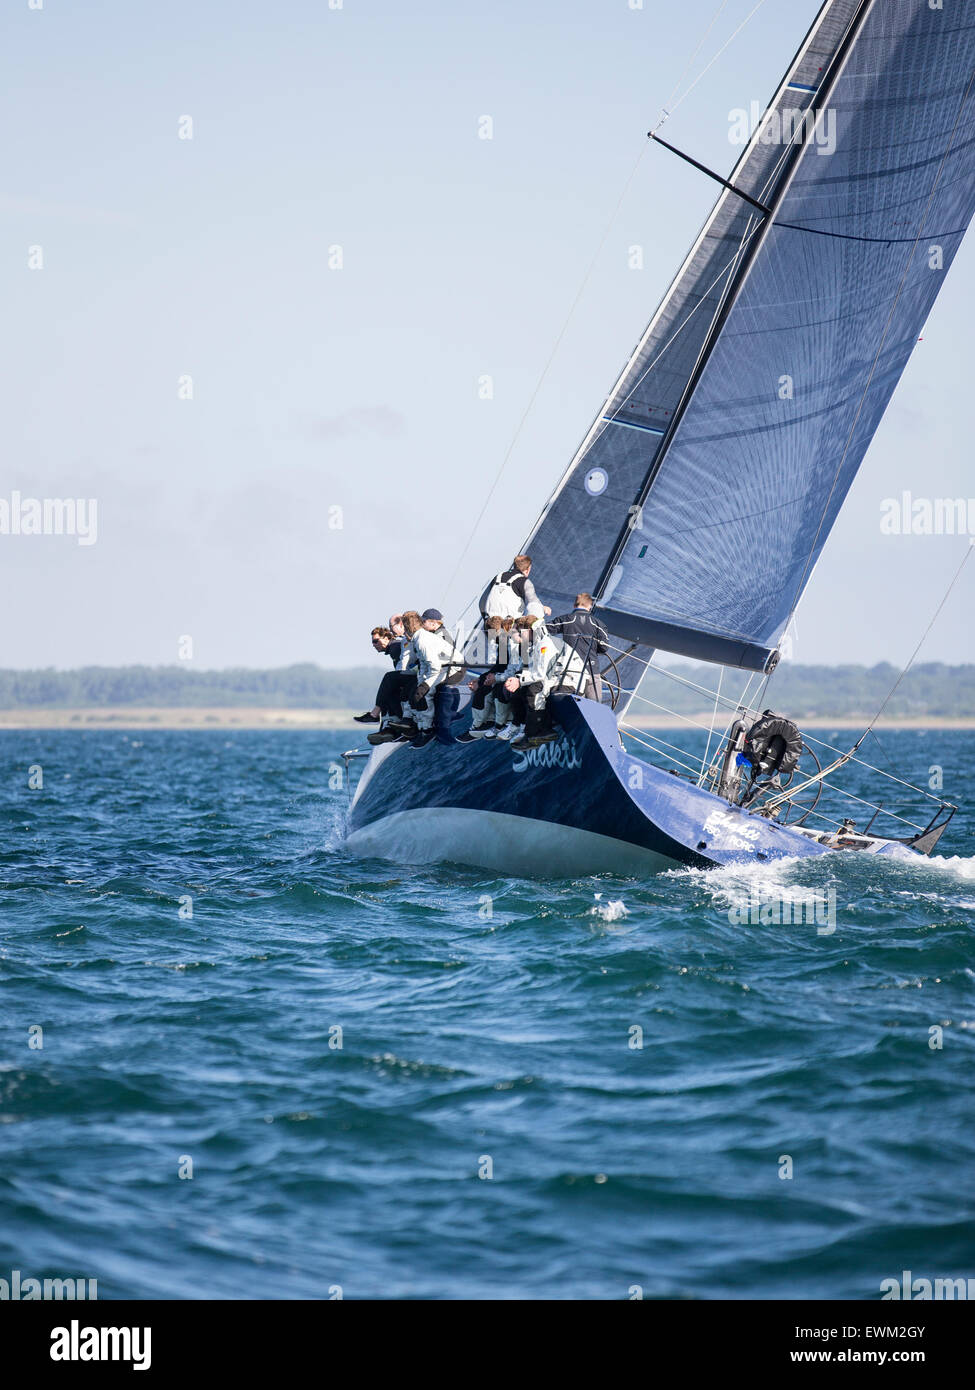 UK. 27th June, 2015. Ker 46 yacht GER7001 'Shakti' taking part in the 2015 Round the Island Race Credit:  Niall Ferguson/Alamy Live News Stock Photo